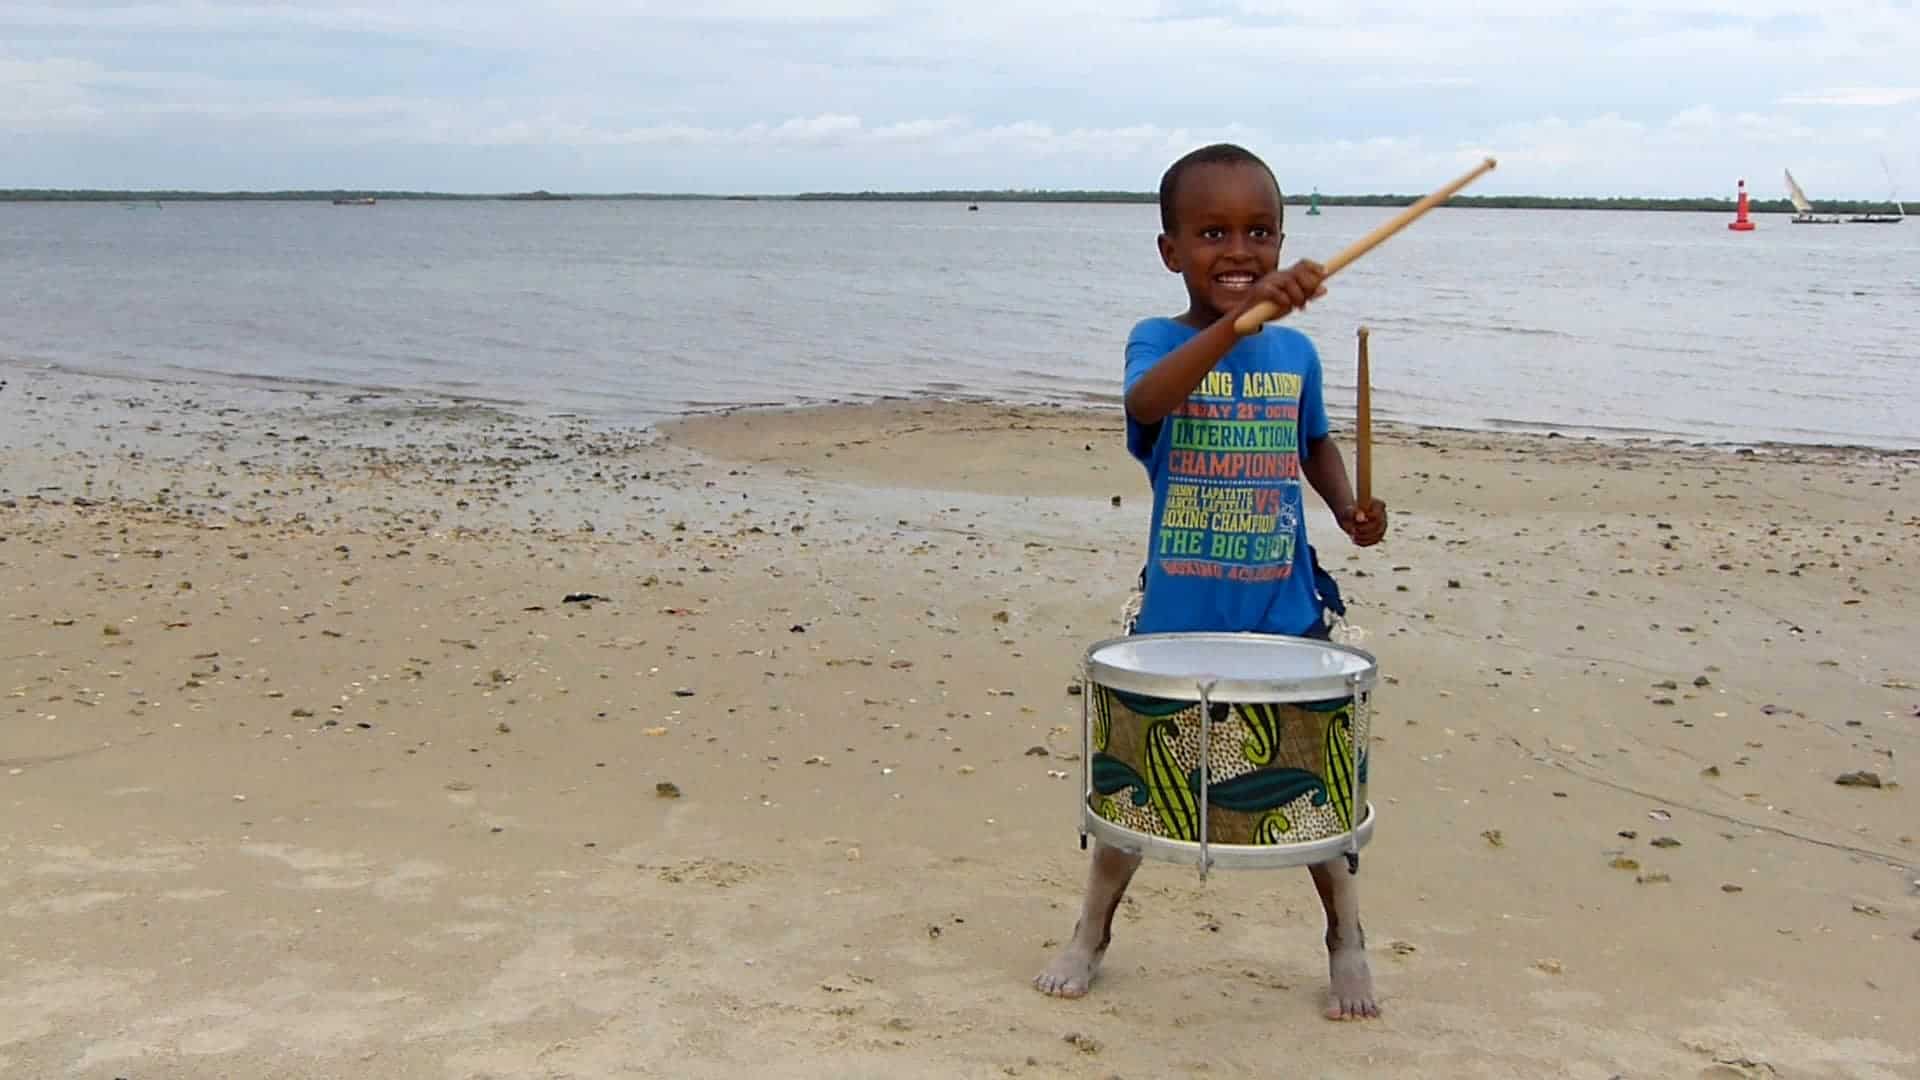 What happens to you for bringing drums to Africa?